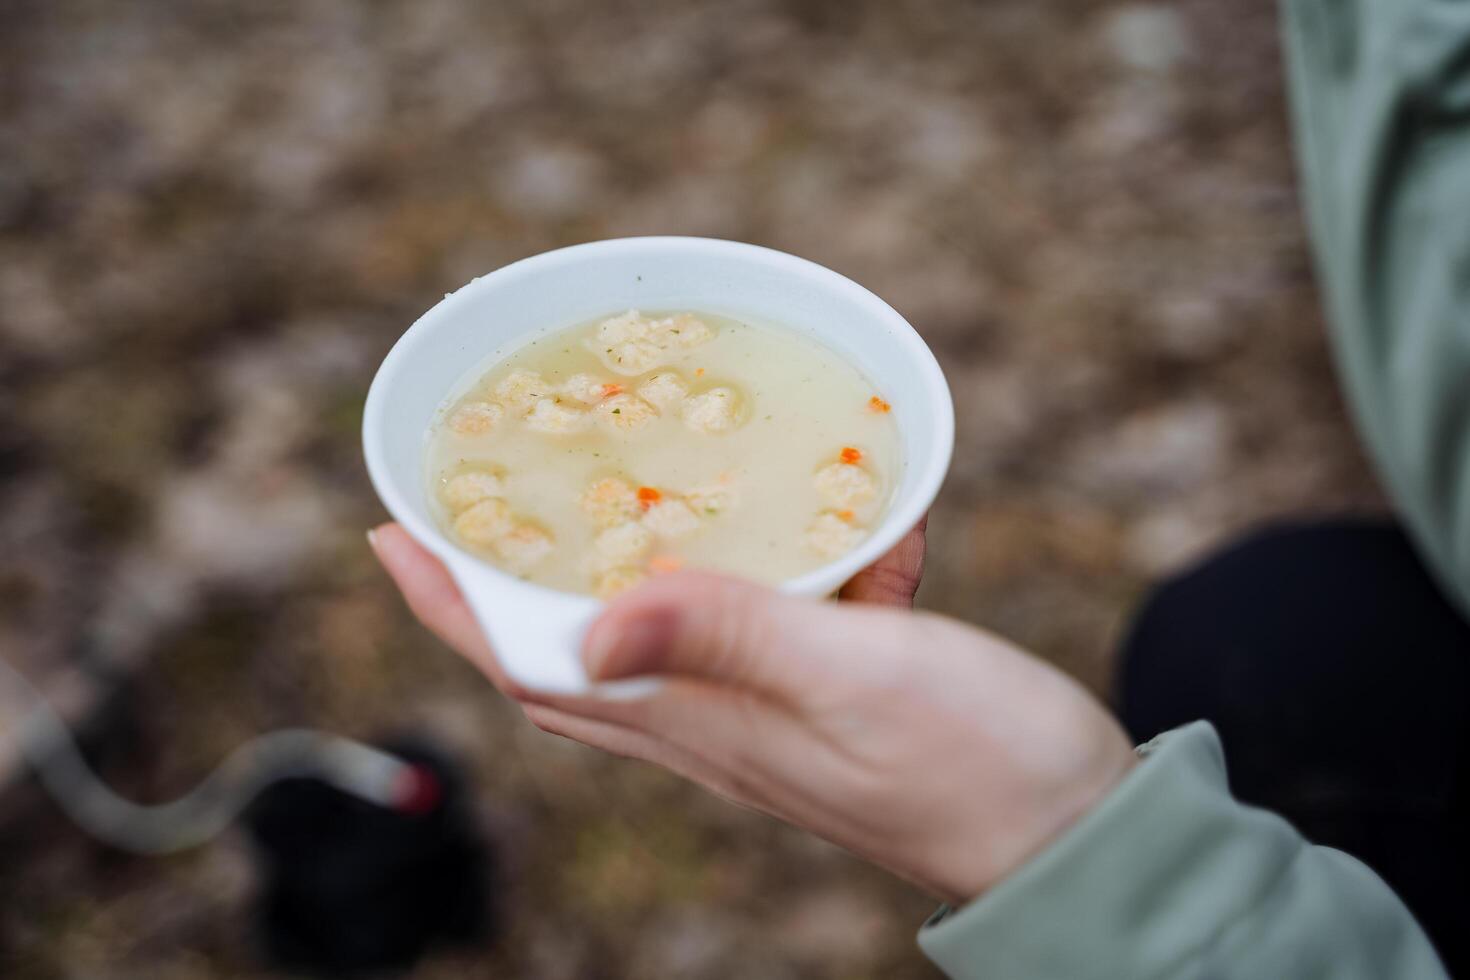 A bowl of soup in hand, a quick meal, a camper's lunch, mashed breadcrumbs, liquid food, a white plate. photo